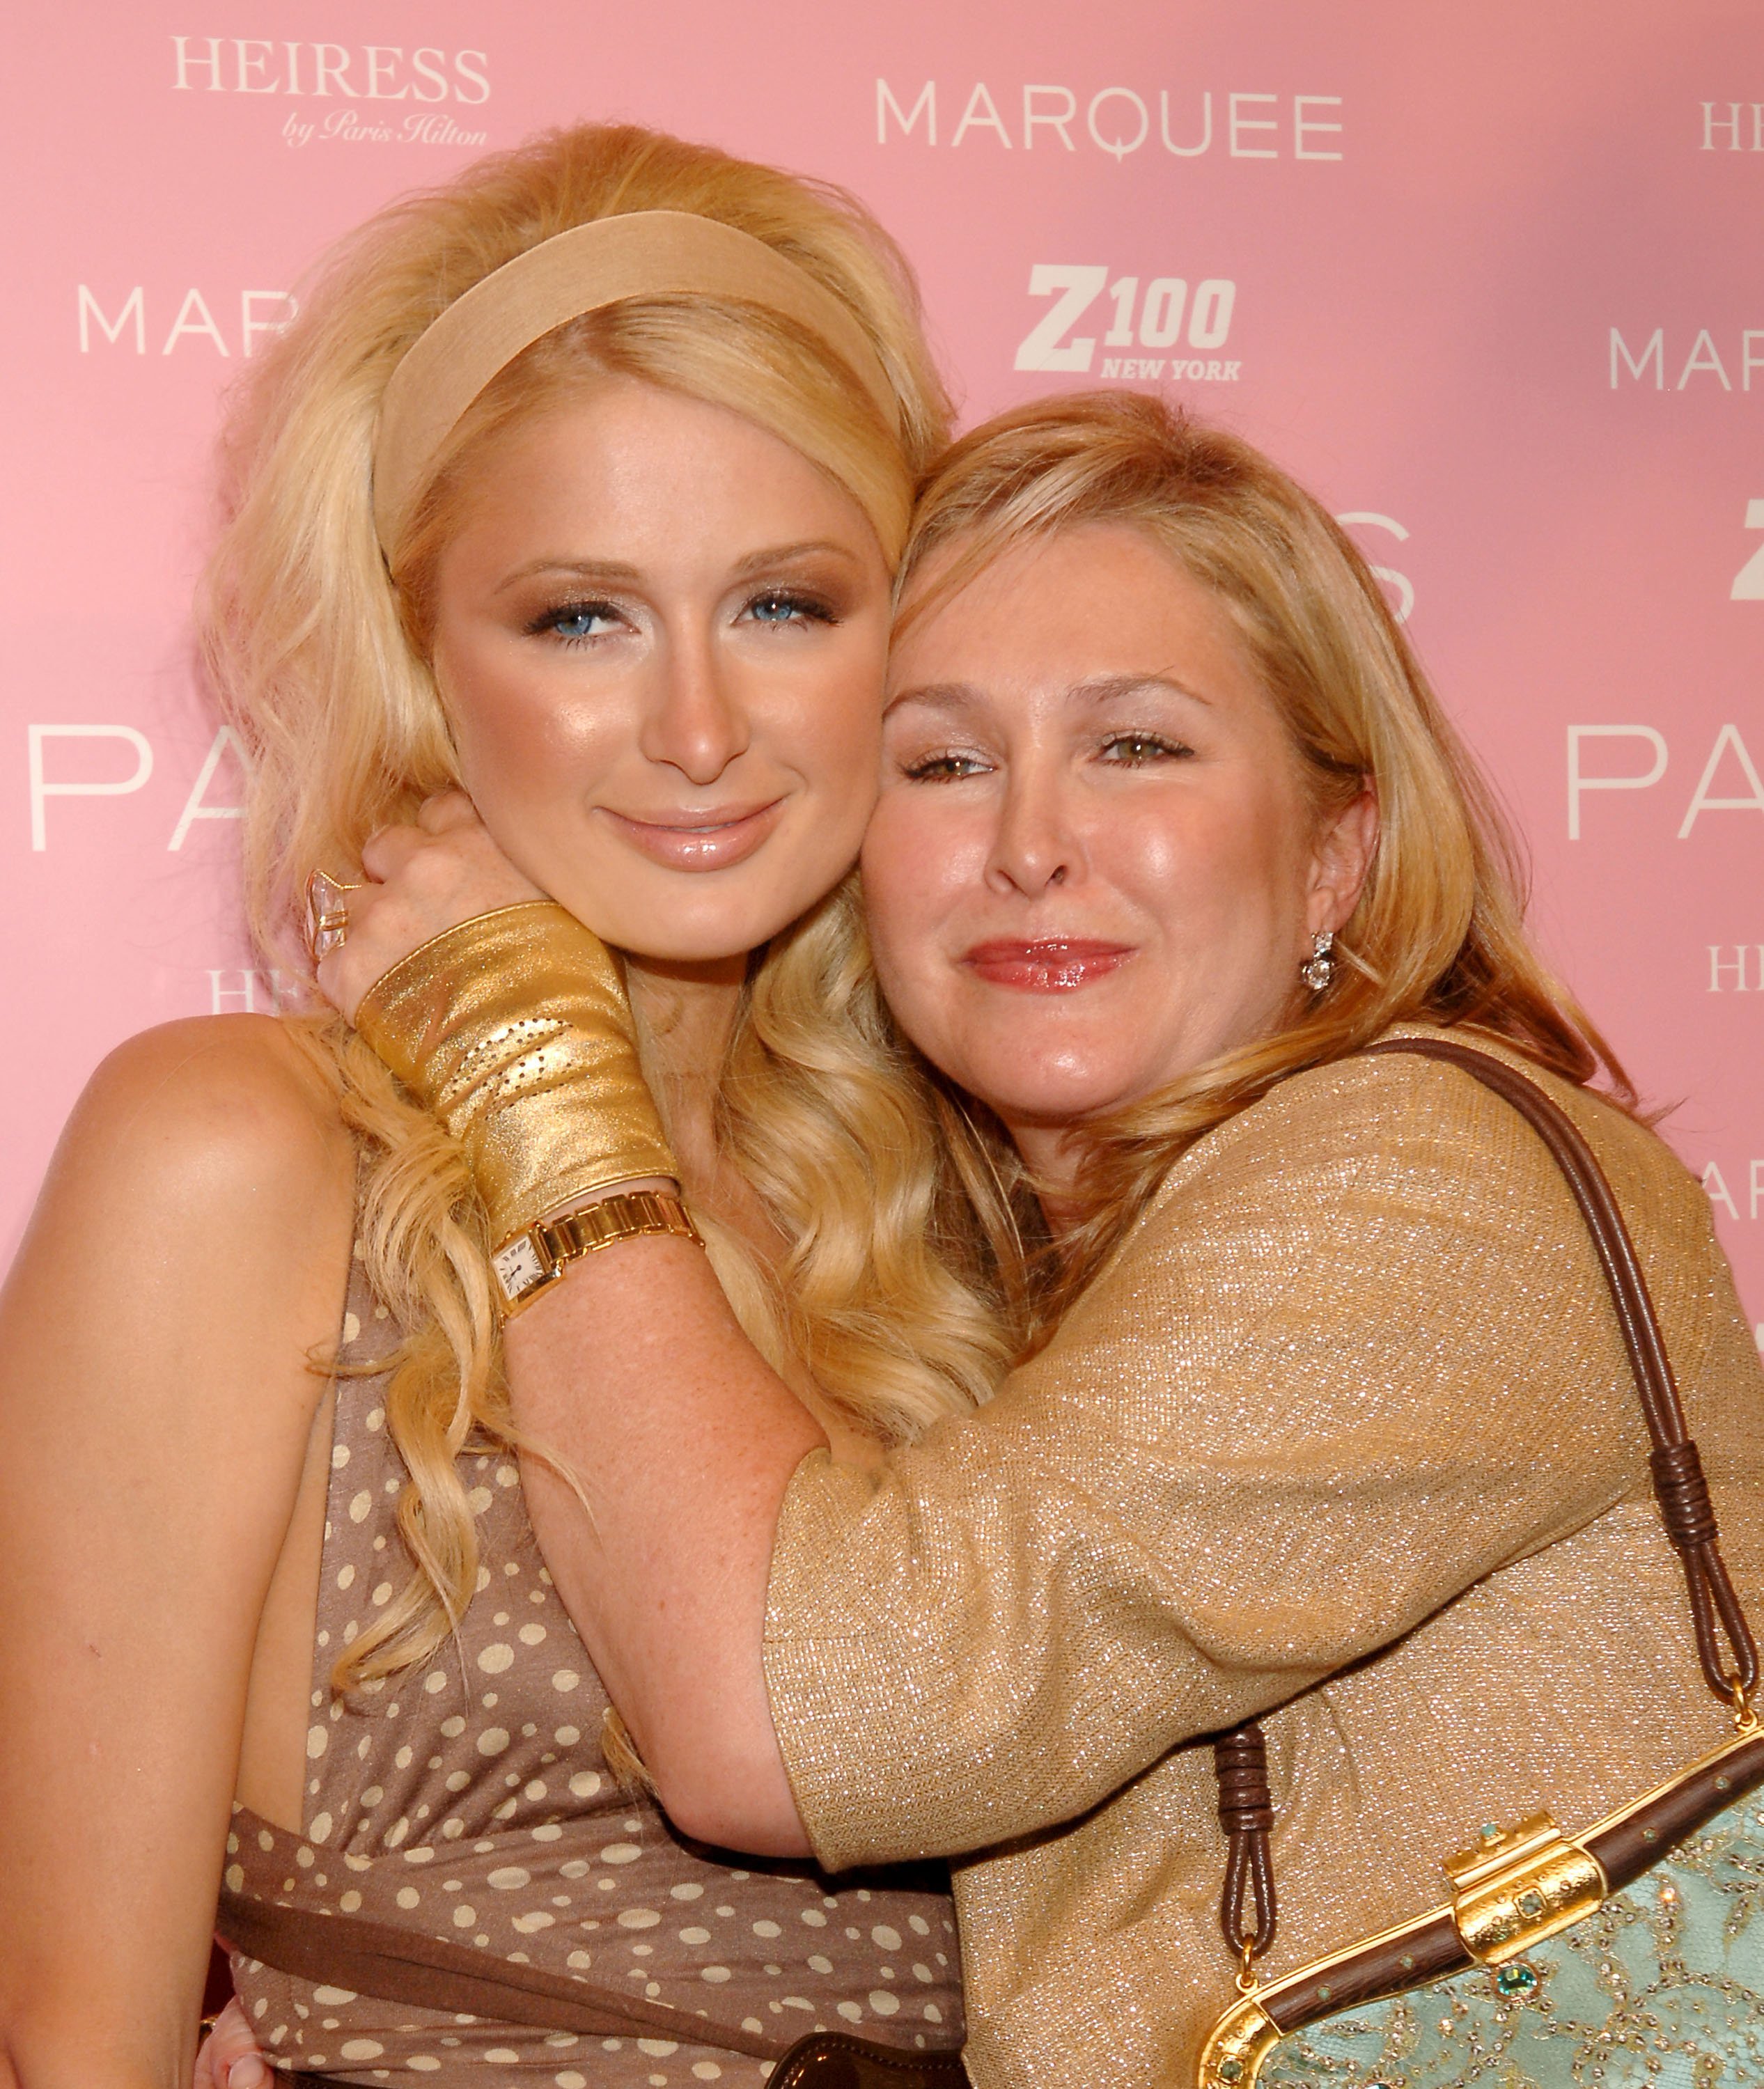 Paris Hilton and Kathy Hilton at the Marquee in New York City, New York on August 16, 2006 | Source: Getty Images